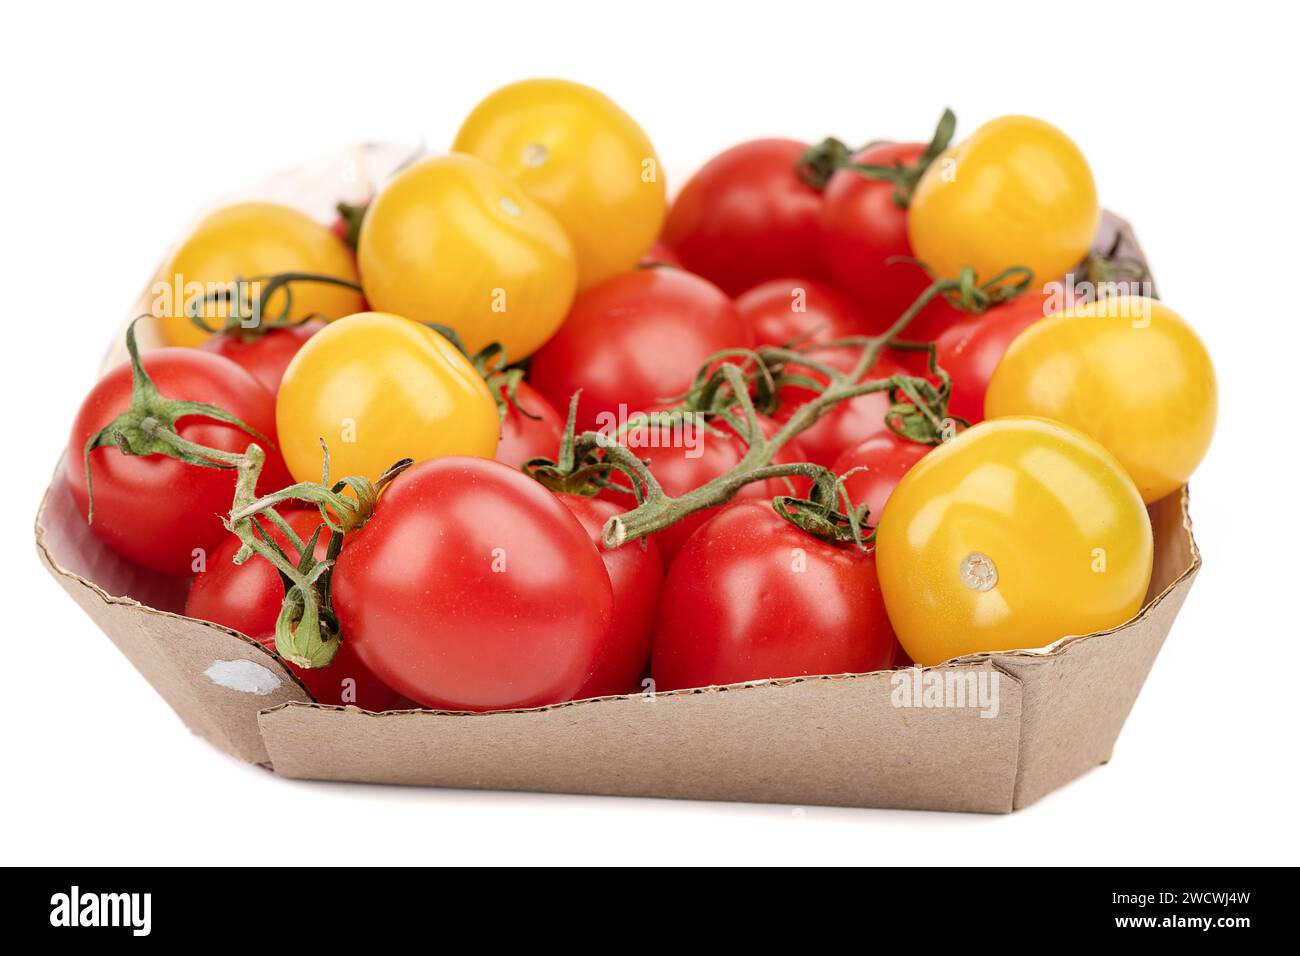 Ripe red and yellow tomatoes in a cardboard box on a white background. Focus on the foreground, background blurred. Copy space. Stock Photo